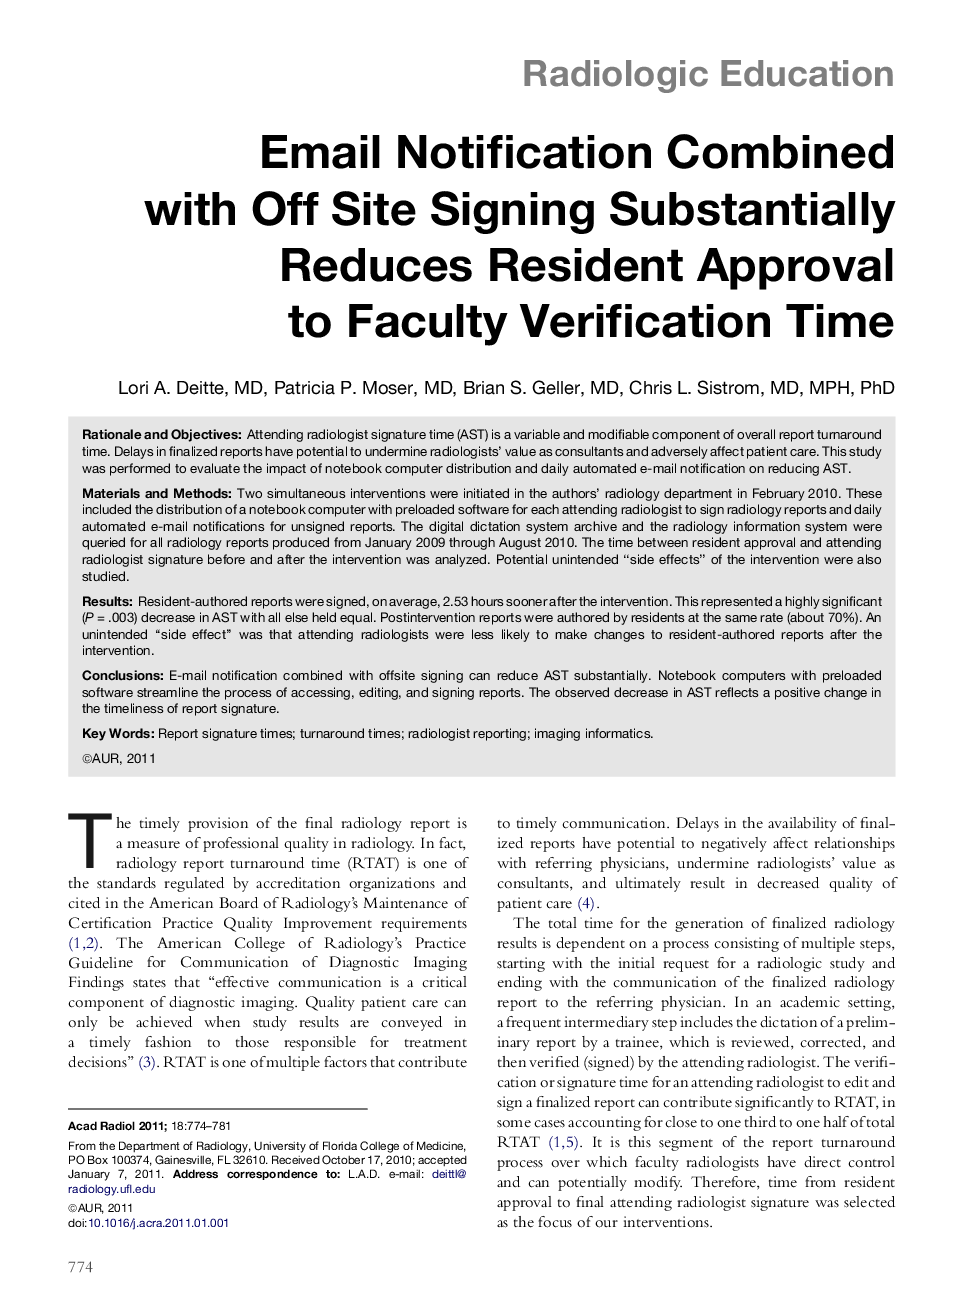 Email Notification Combined with Off Site Signing Substantially Reduces Resident Approval to Faculty Verification Time